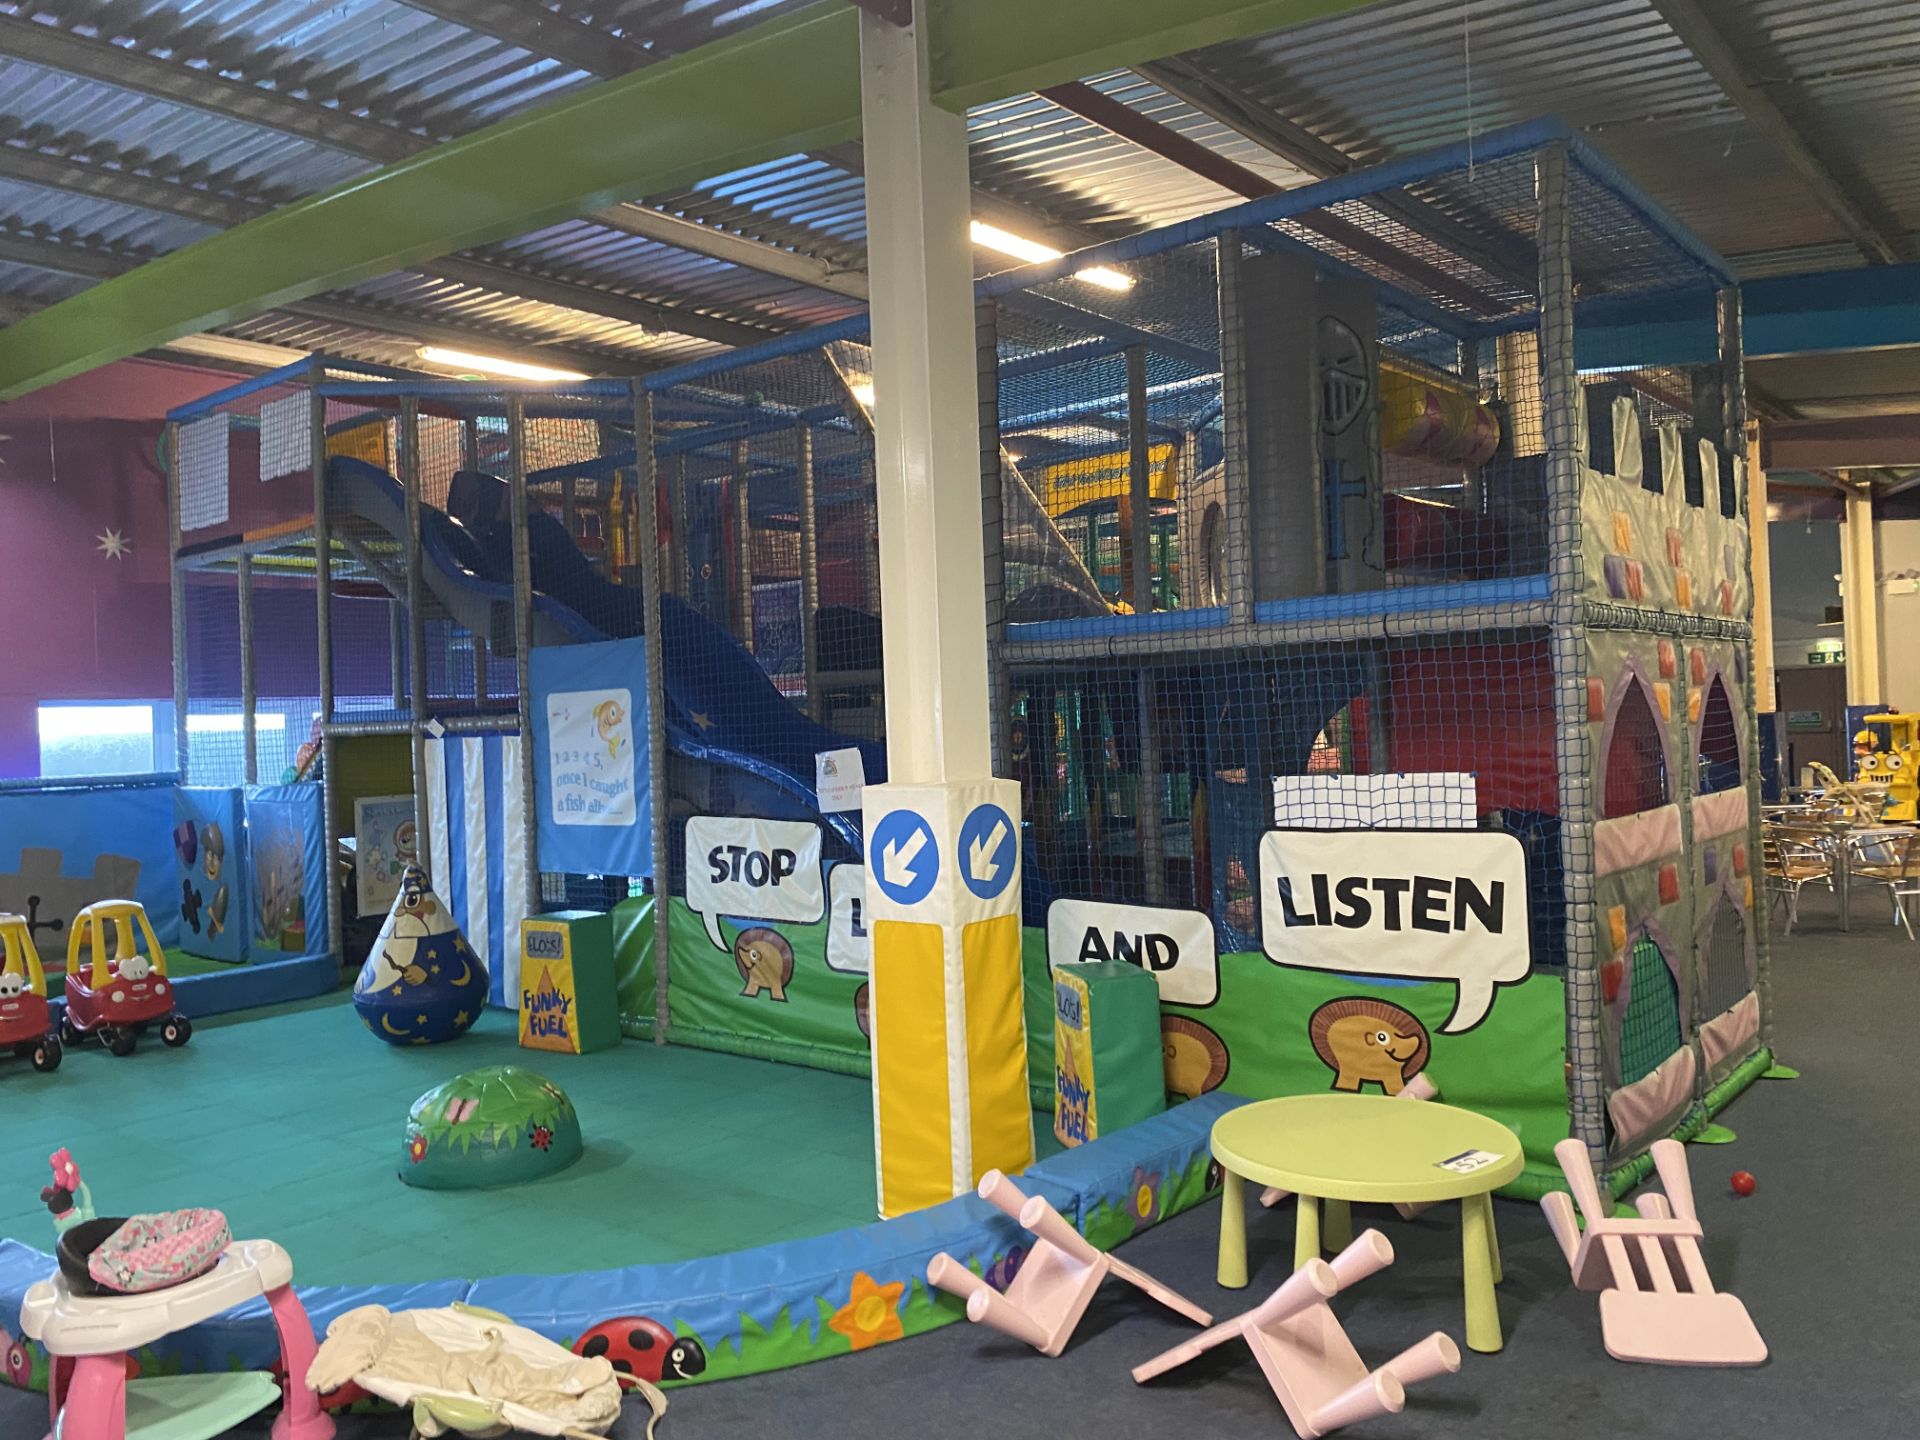 TWO TIER CHILDREN’S SOFT PLAY STRUCTURE, approx. 23m long x 11m wide x 4m high overall, with two